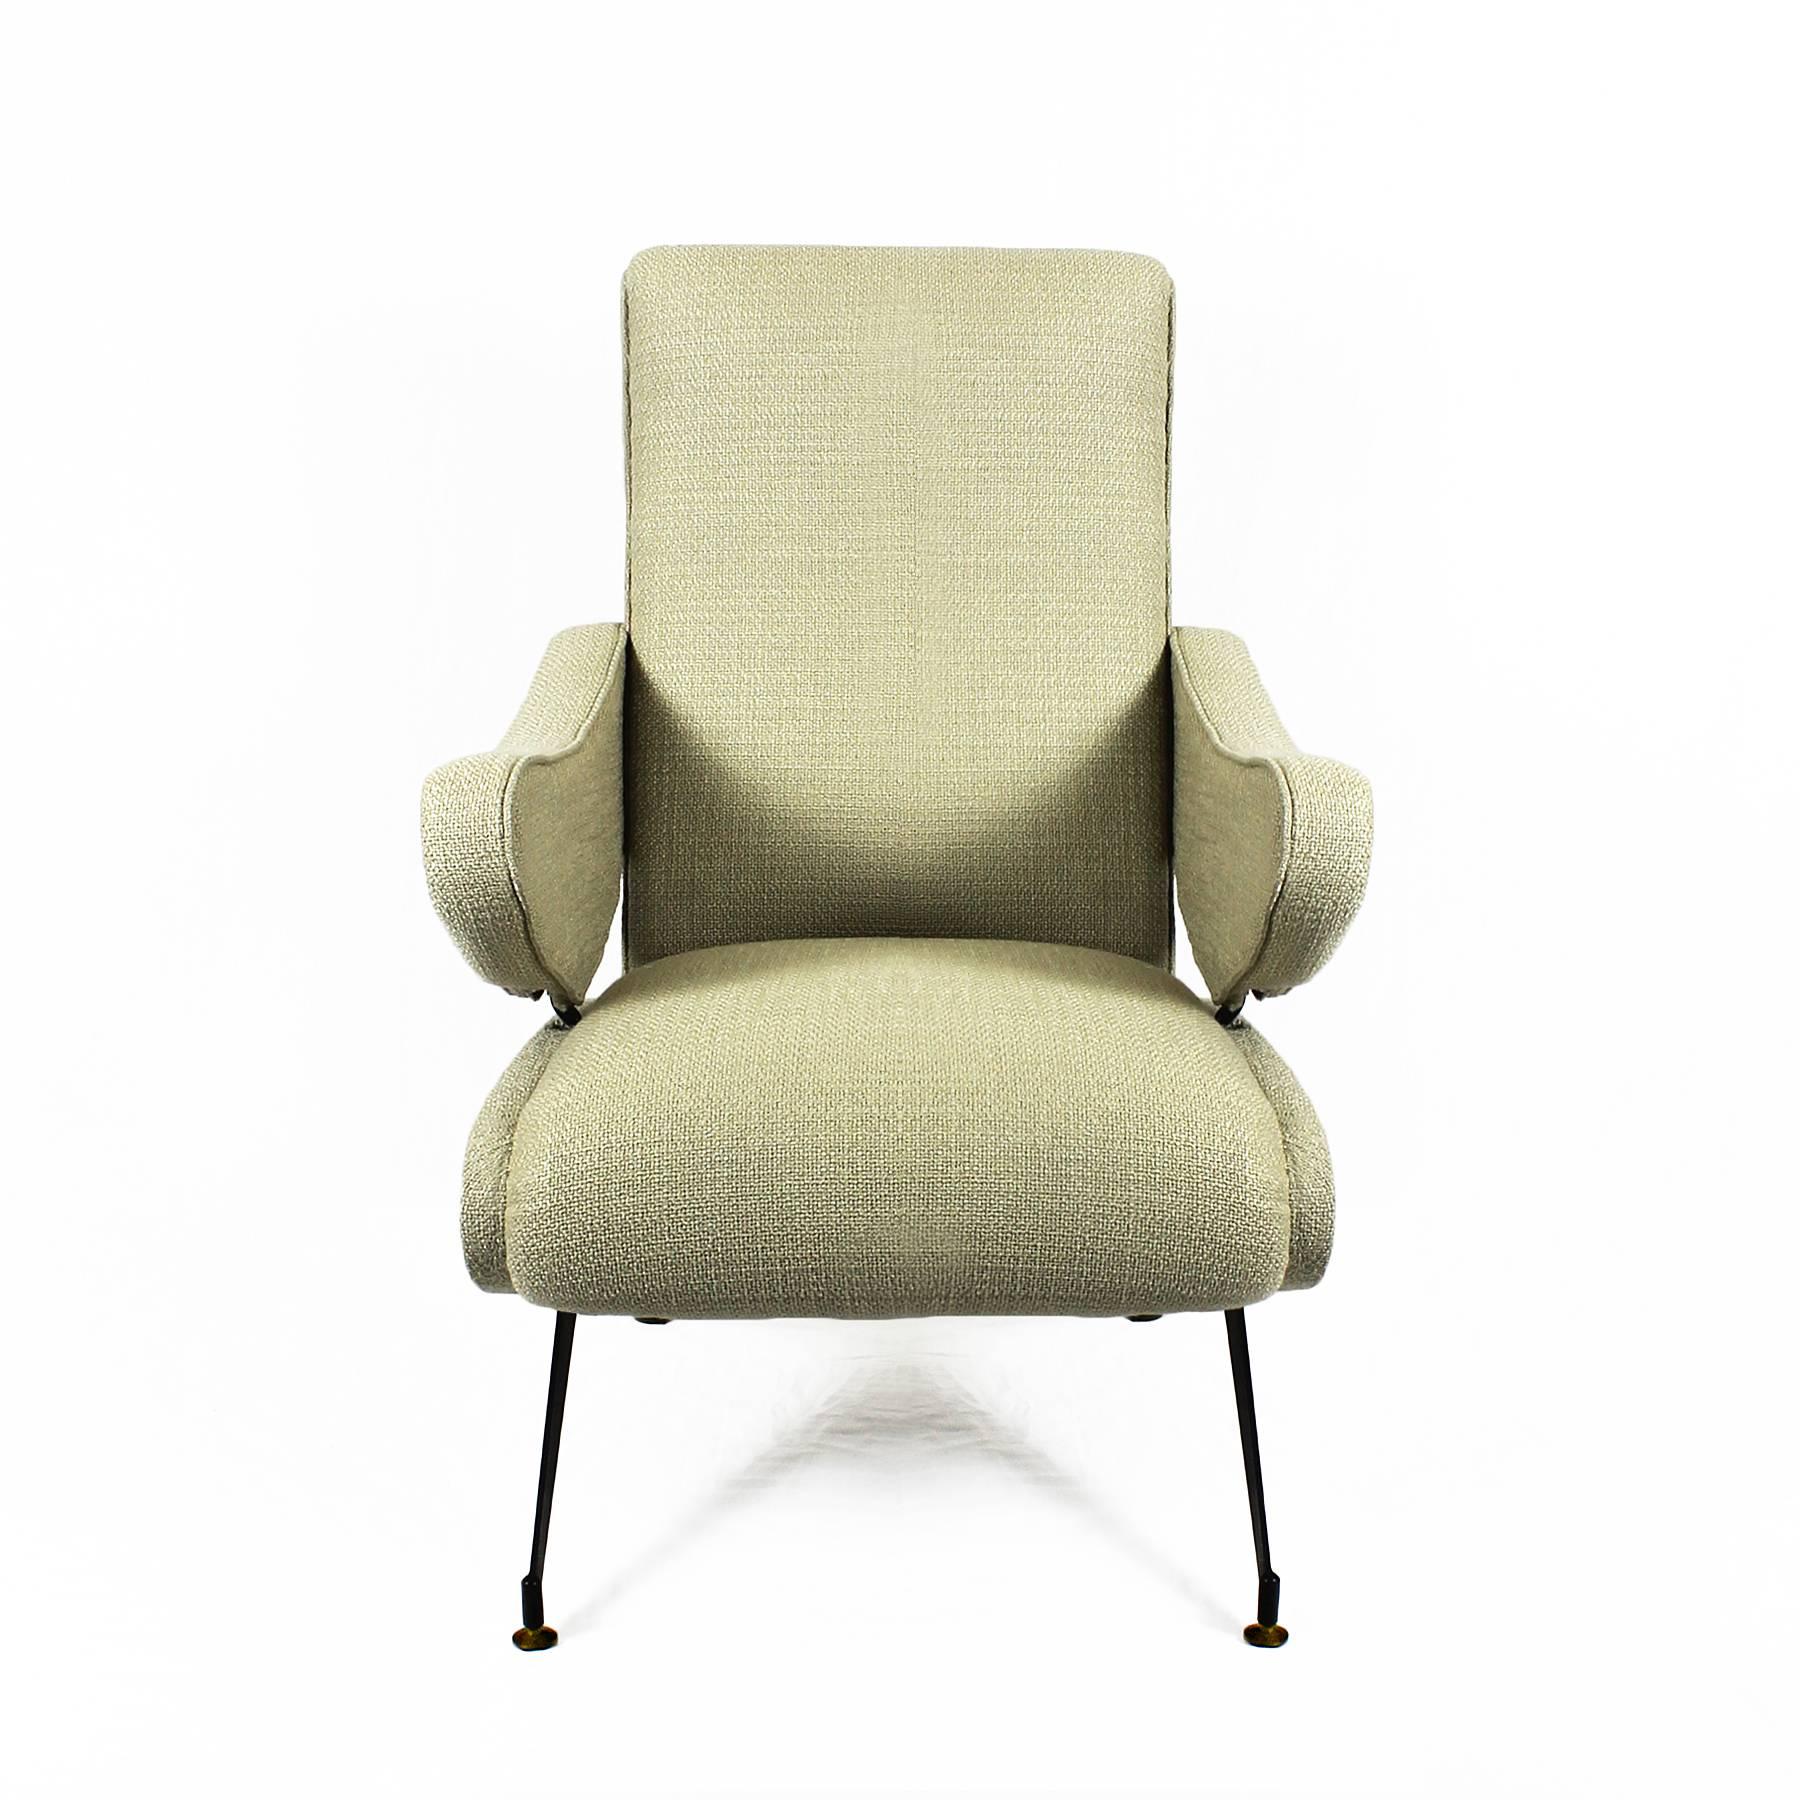 Reclinable armchair, black steel feet and brass hardware. Loop pile beige fabric new upholstery.
Maker: Mobilificio Oscar Gigante.
Italy, circa 1960.

Depth: Max 90 cm.

  